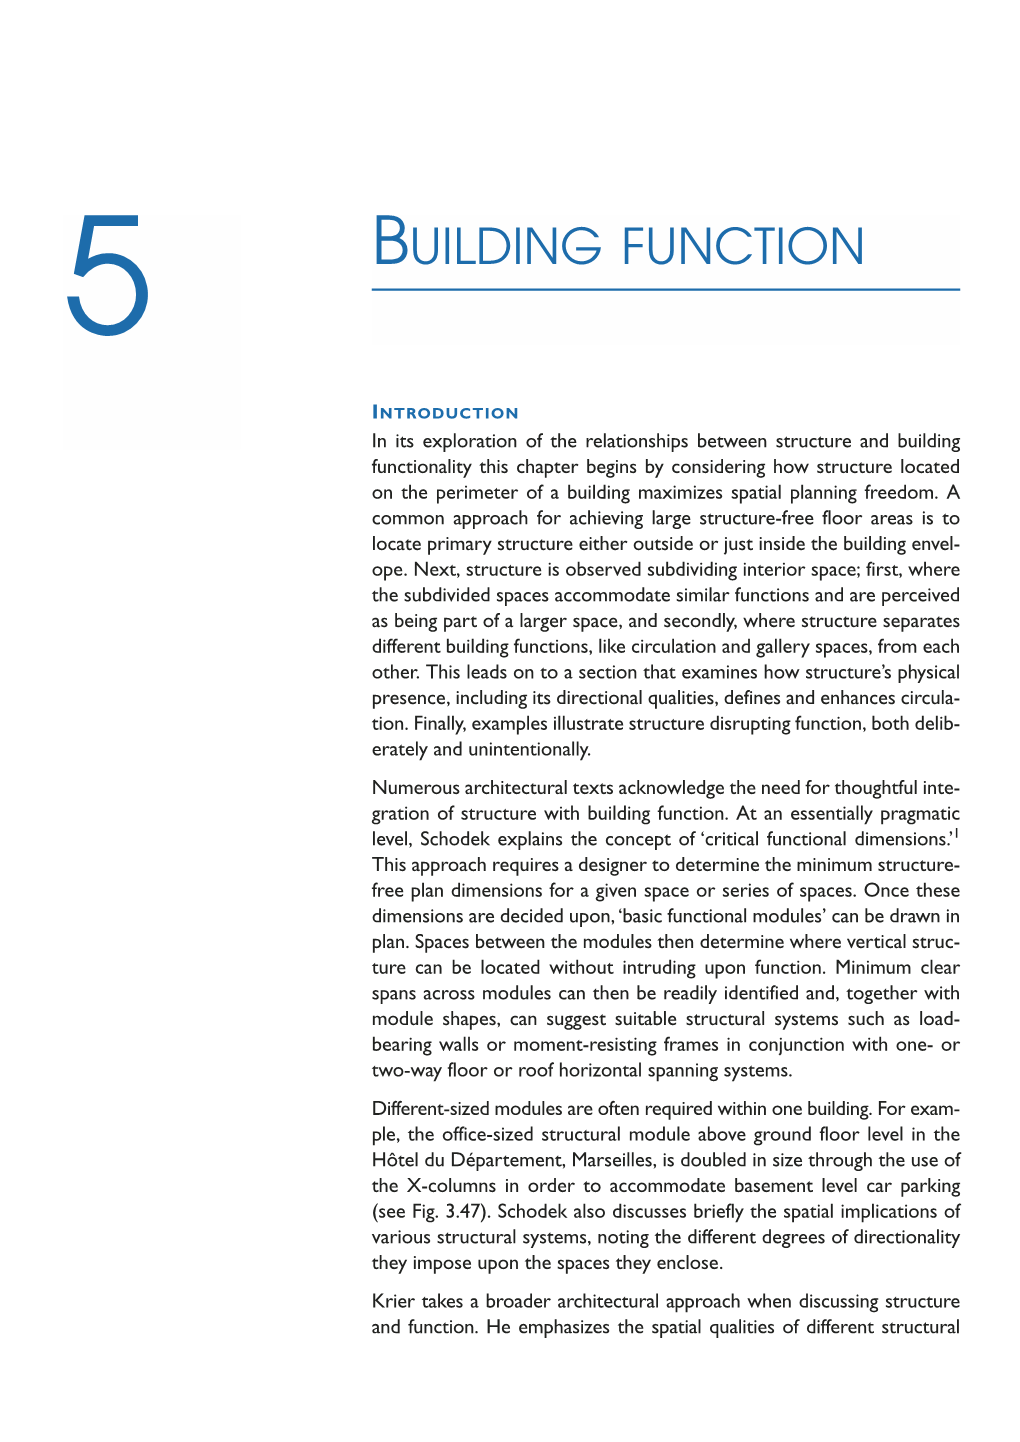 Building Function